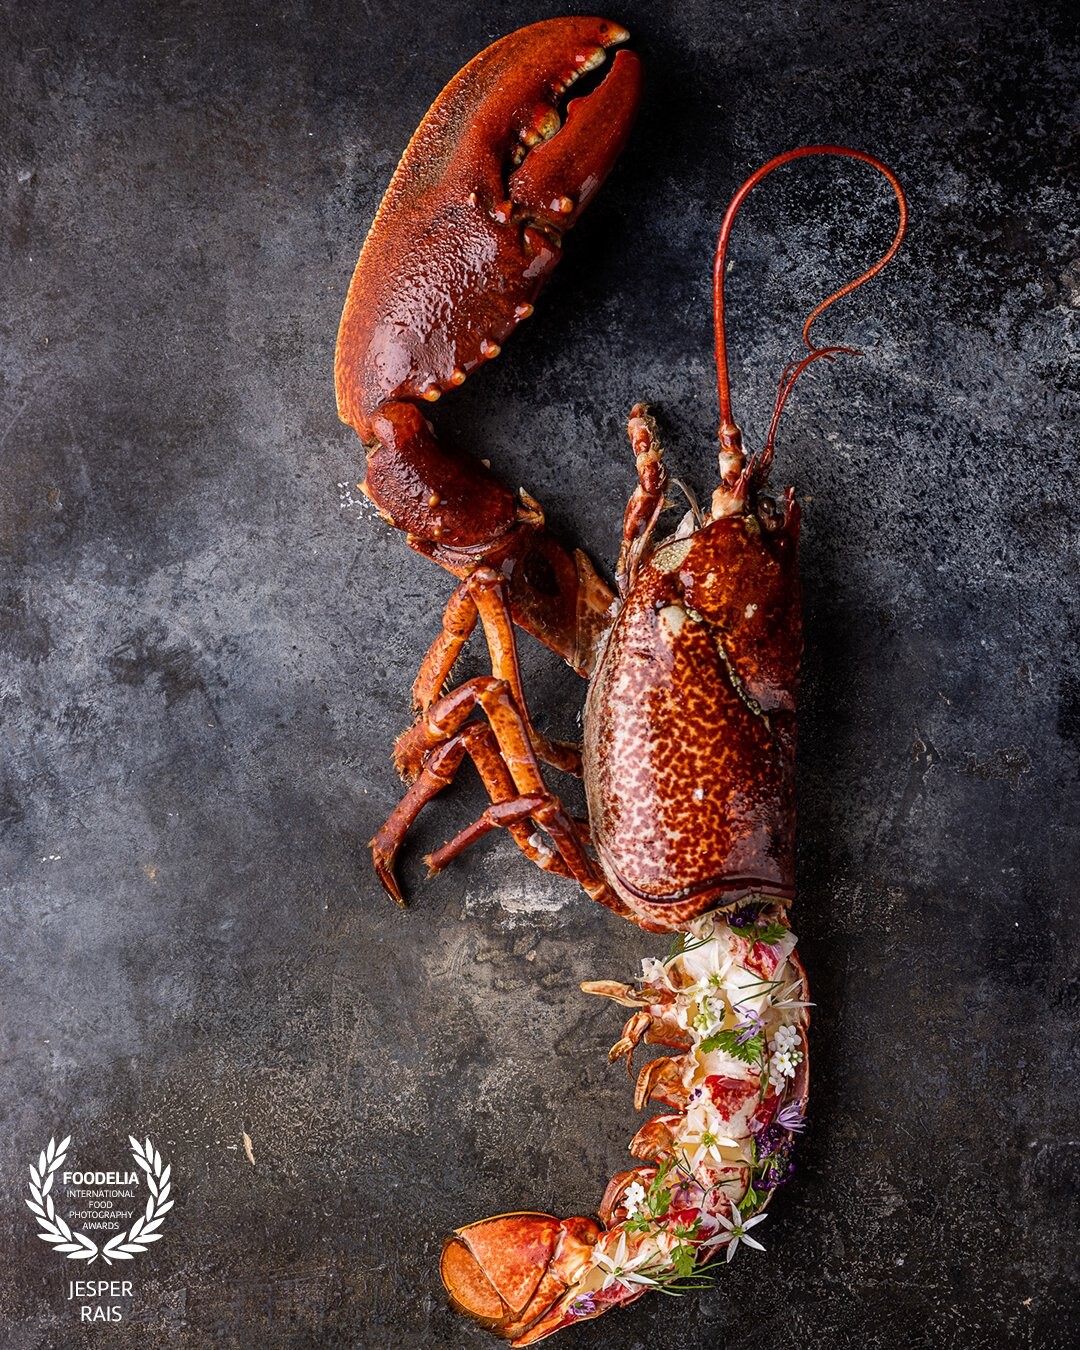 Beautiful lobster serving - Coverpicture from the newest book "SHELLFISH" by photographer @raisfoto and chef @dennisrafn from Denmark